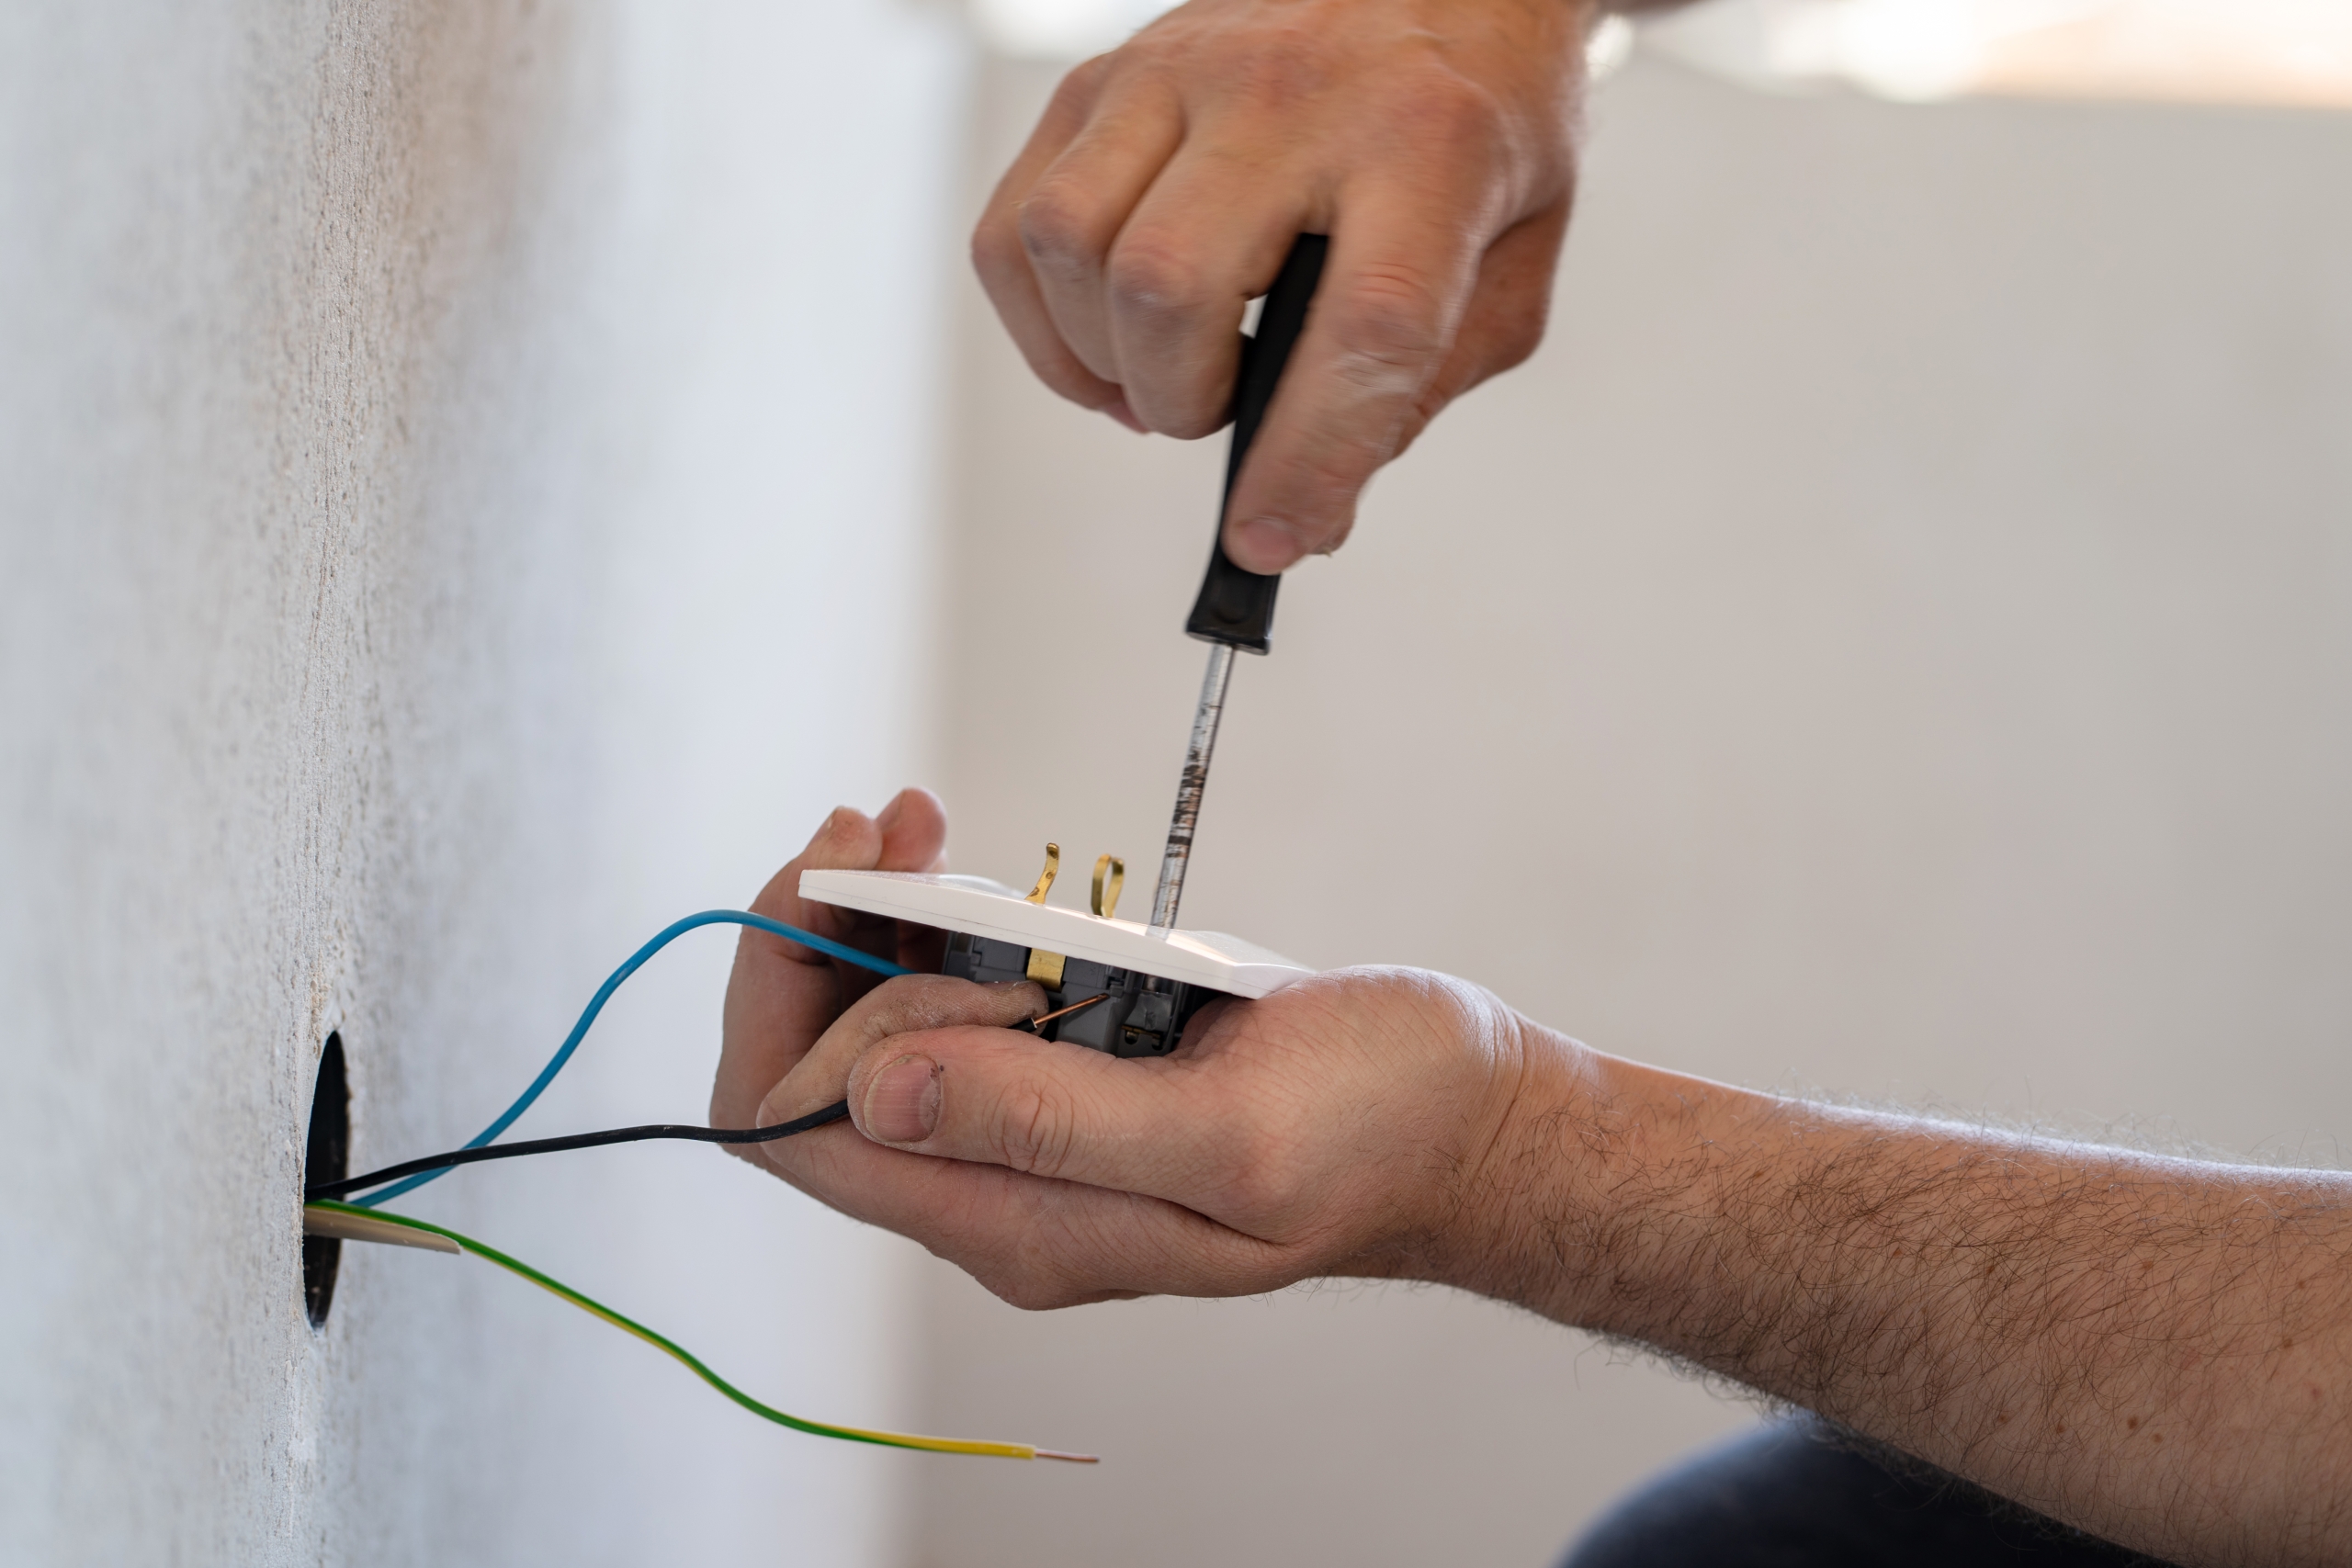 How to Find an Electrical Short in Your Home